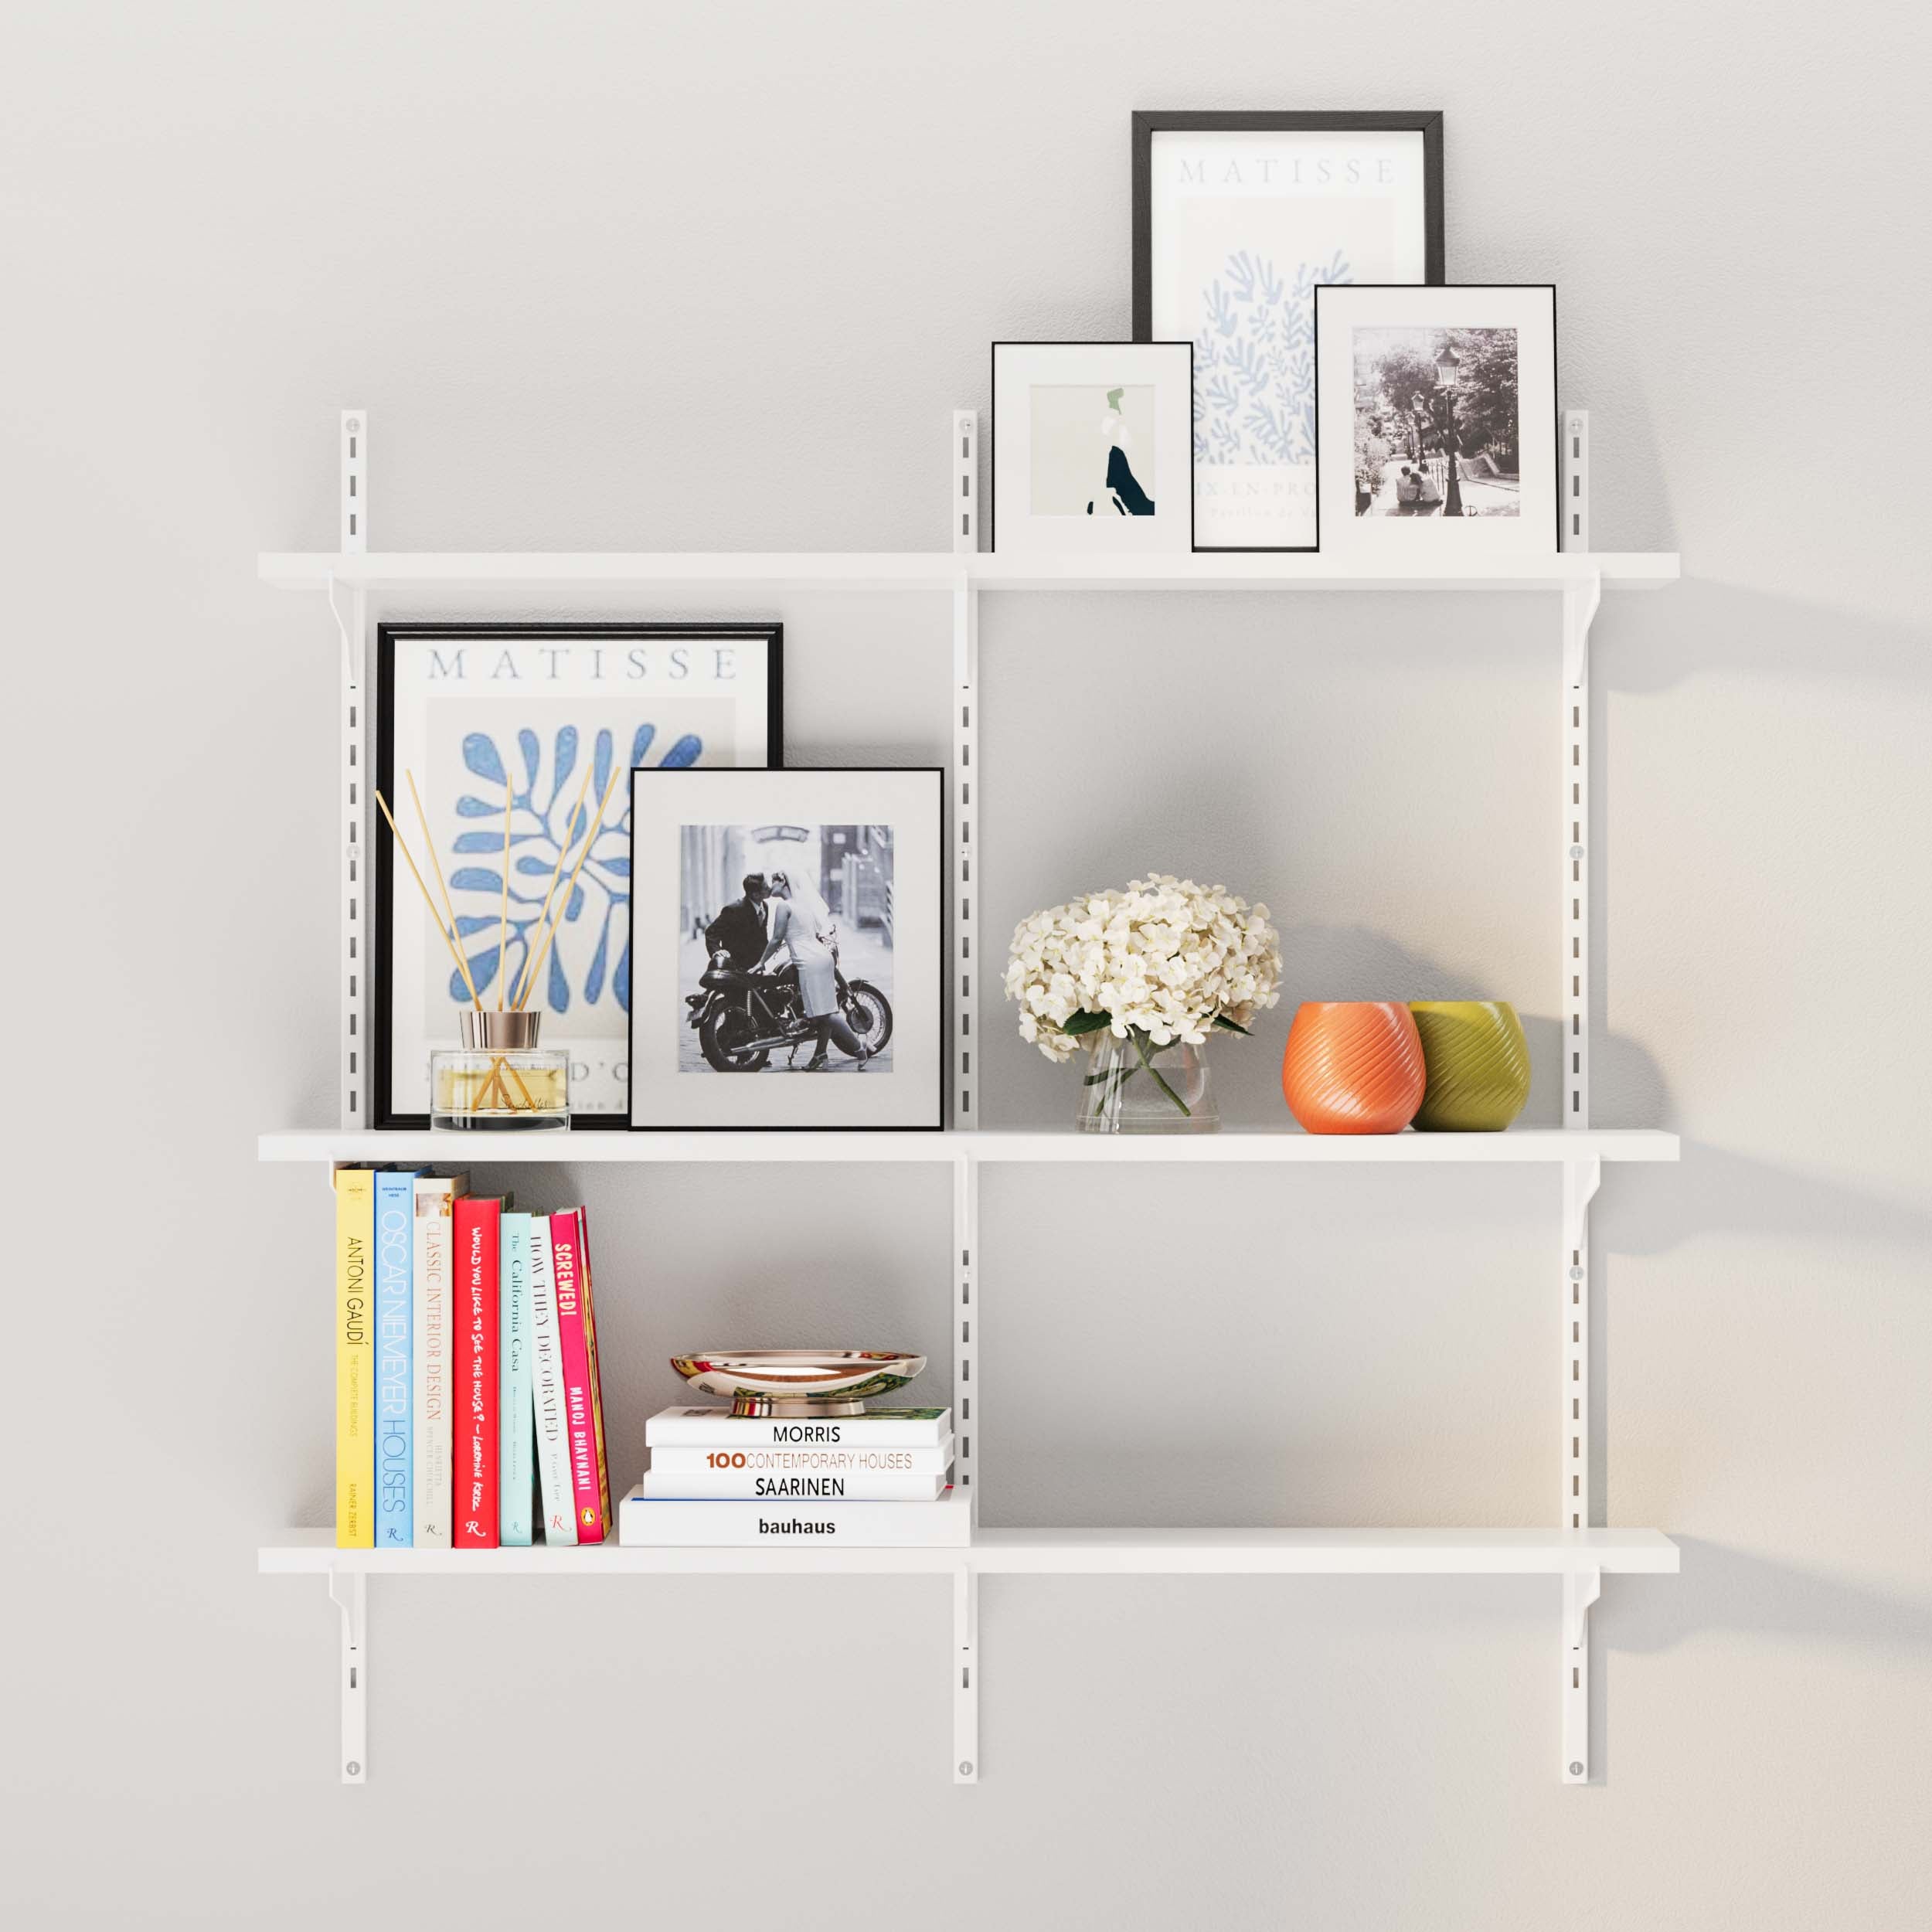 Wall shelves white with framed art, books, and decorative items against a light wall.